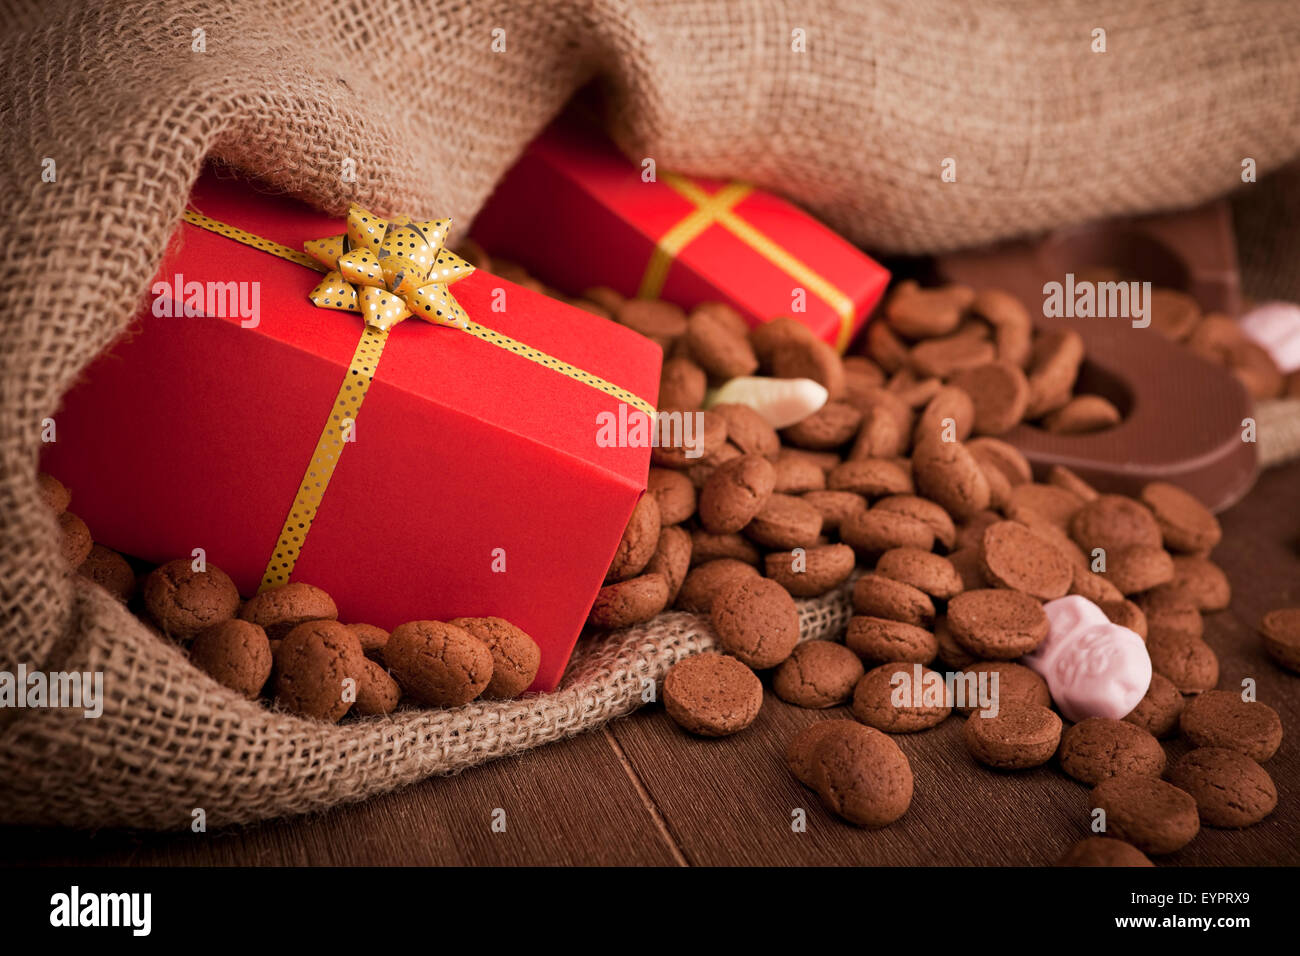 'De zak van Sinterklaas' (St. Nicholas' bag) filled with 'pepernoten', a letter of chocolate and sweets. A Dutch tradition. Stock Photo